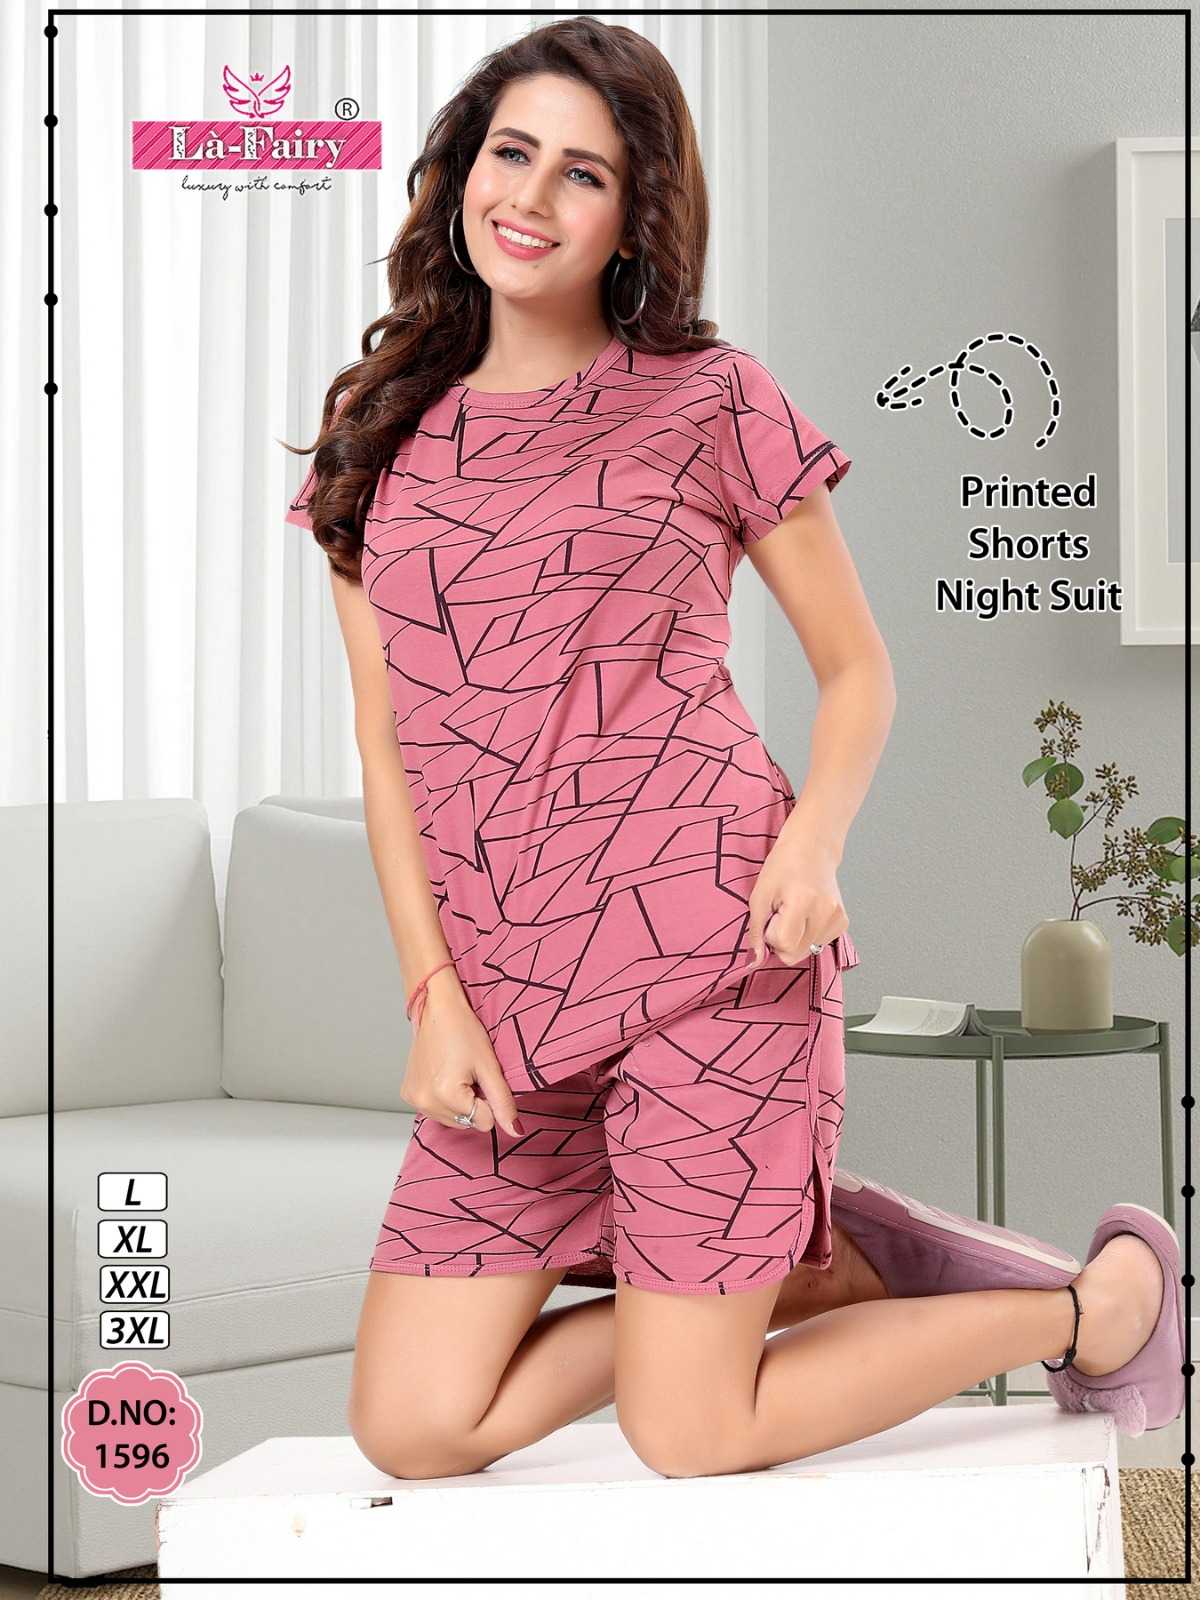  là fairy present 1596 regular use printed hosiery tshirt with hot pants night suit collection